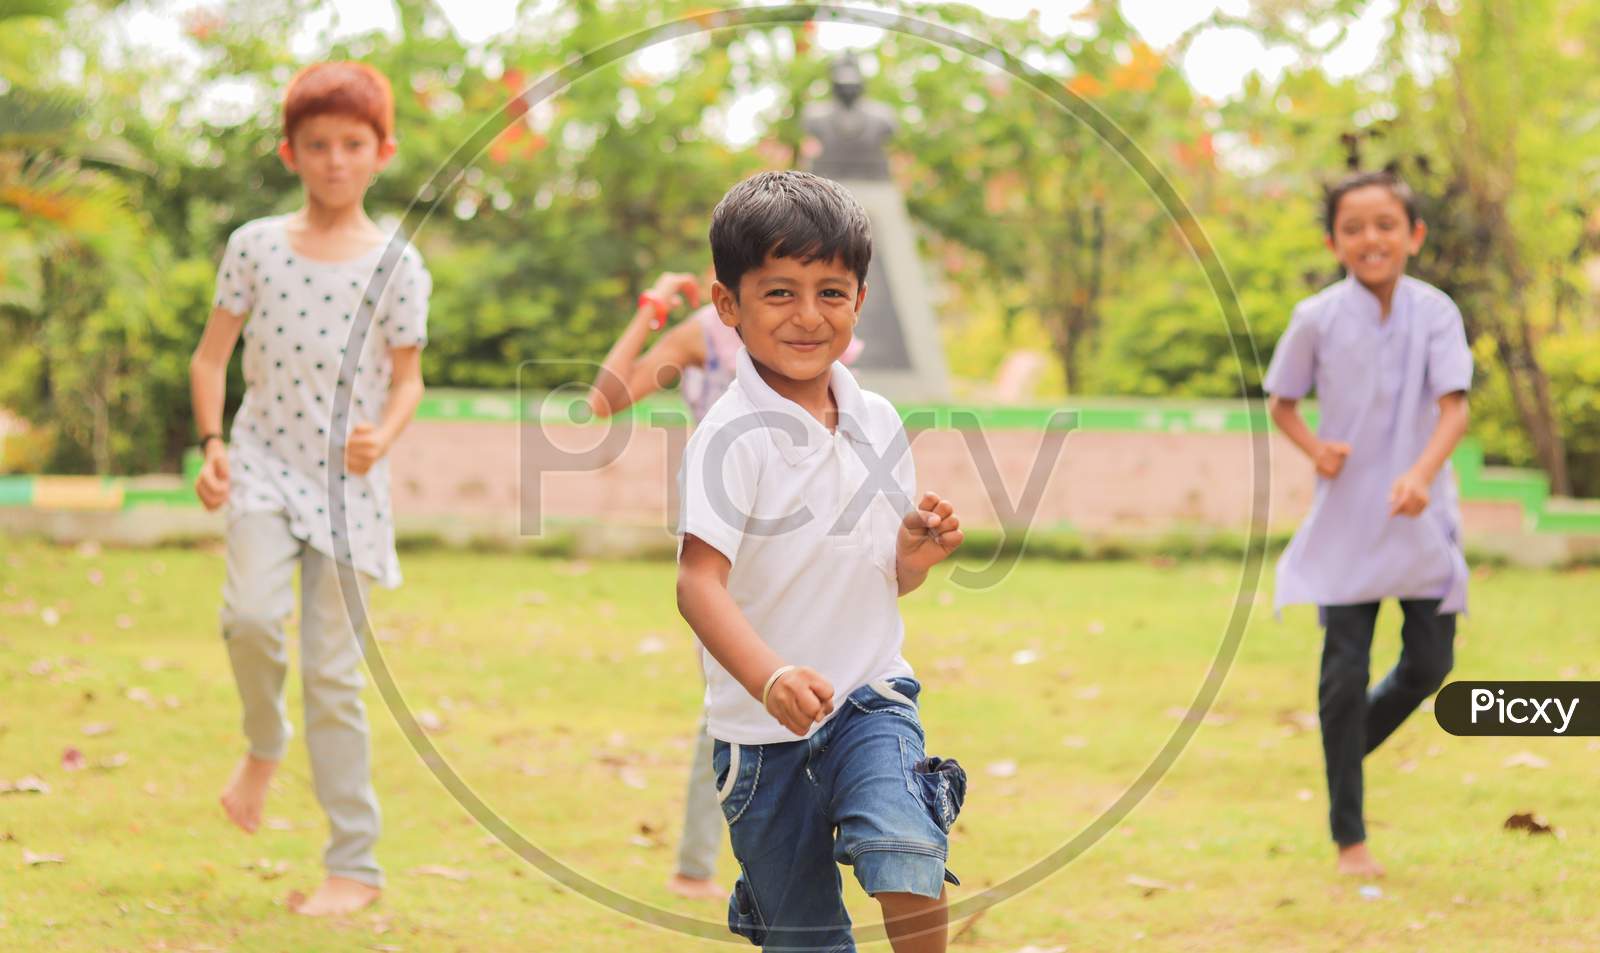 Children Playing Outdoor Games - Concept Of Kids Enjoying Outdoor Games In Technology-Driven World.